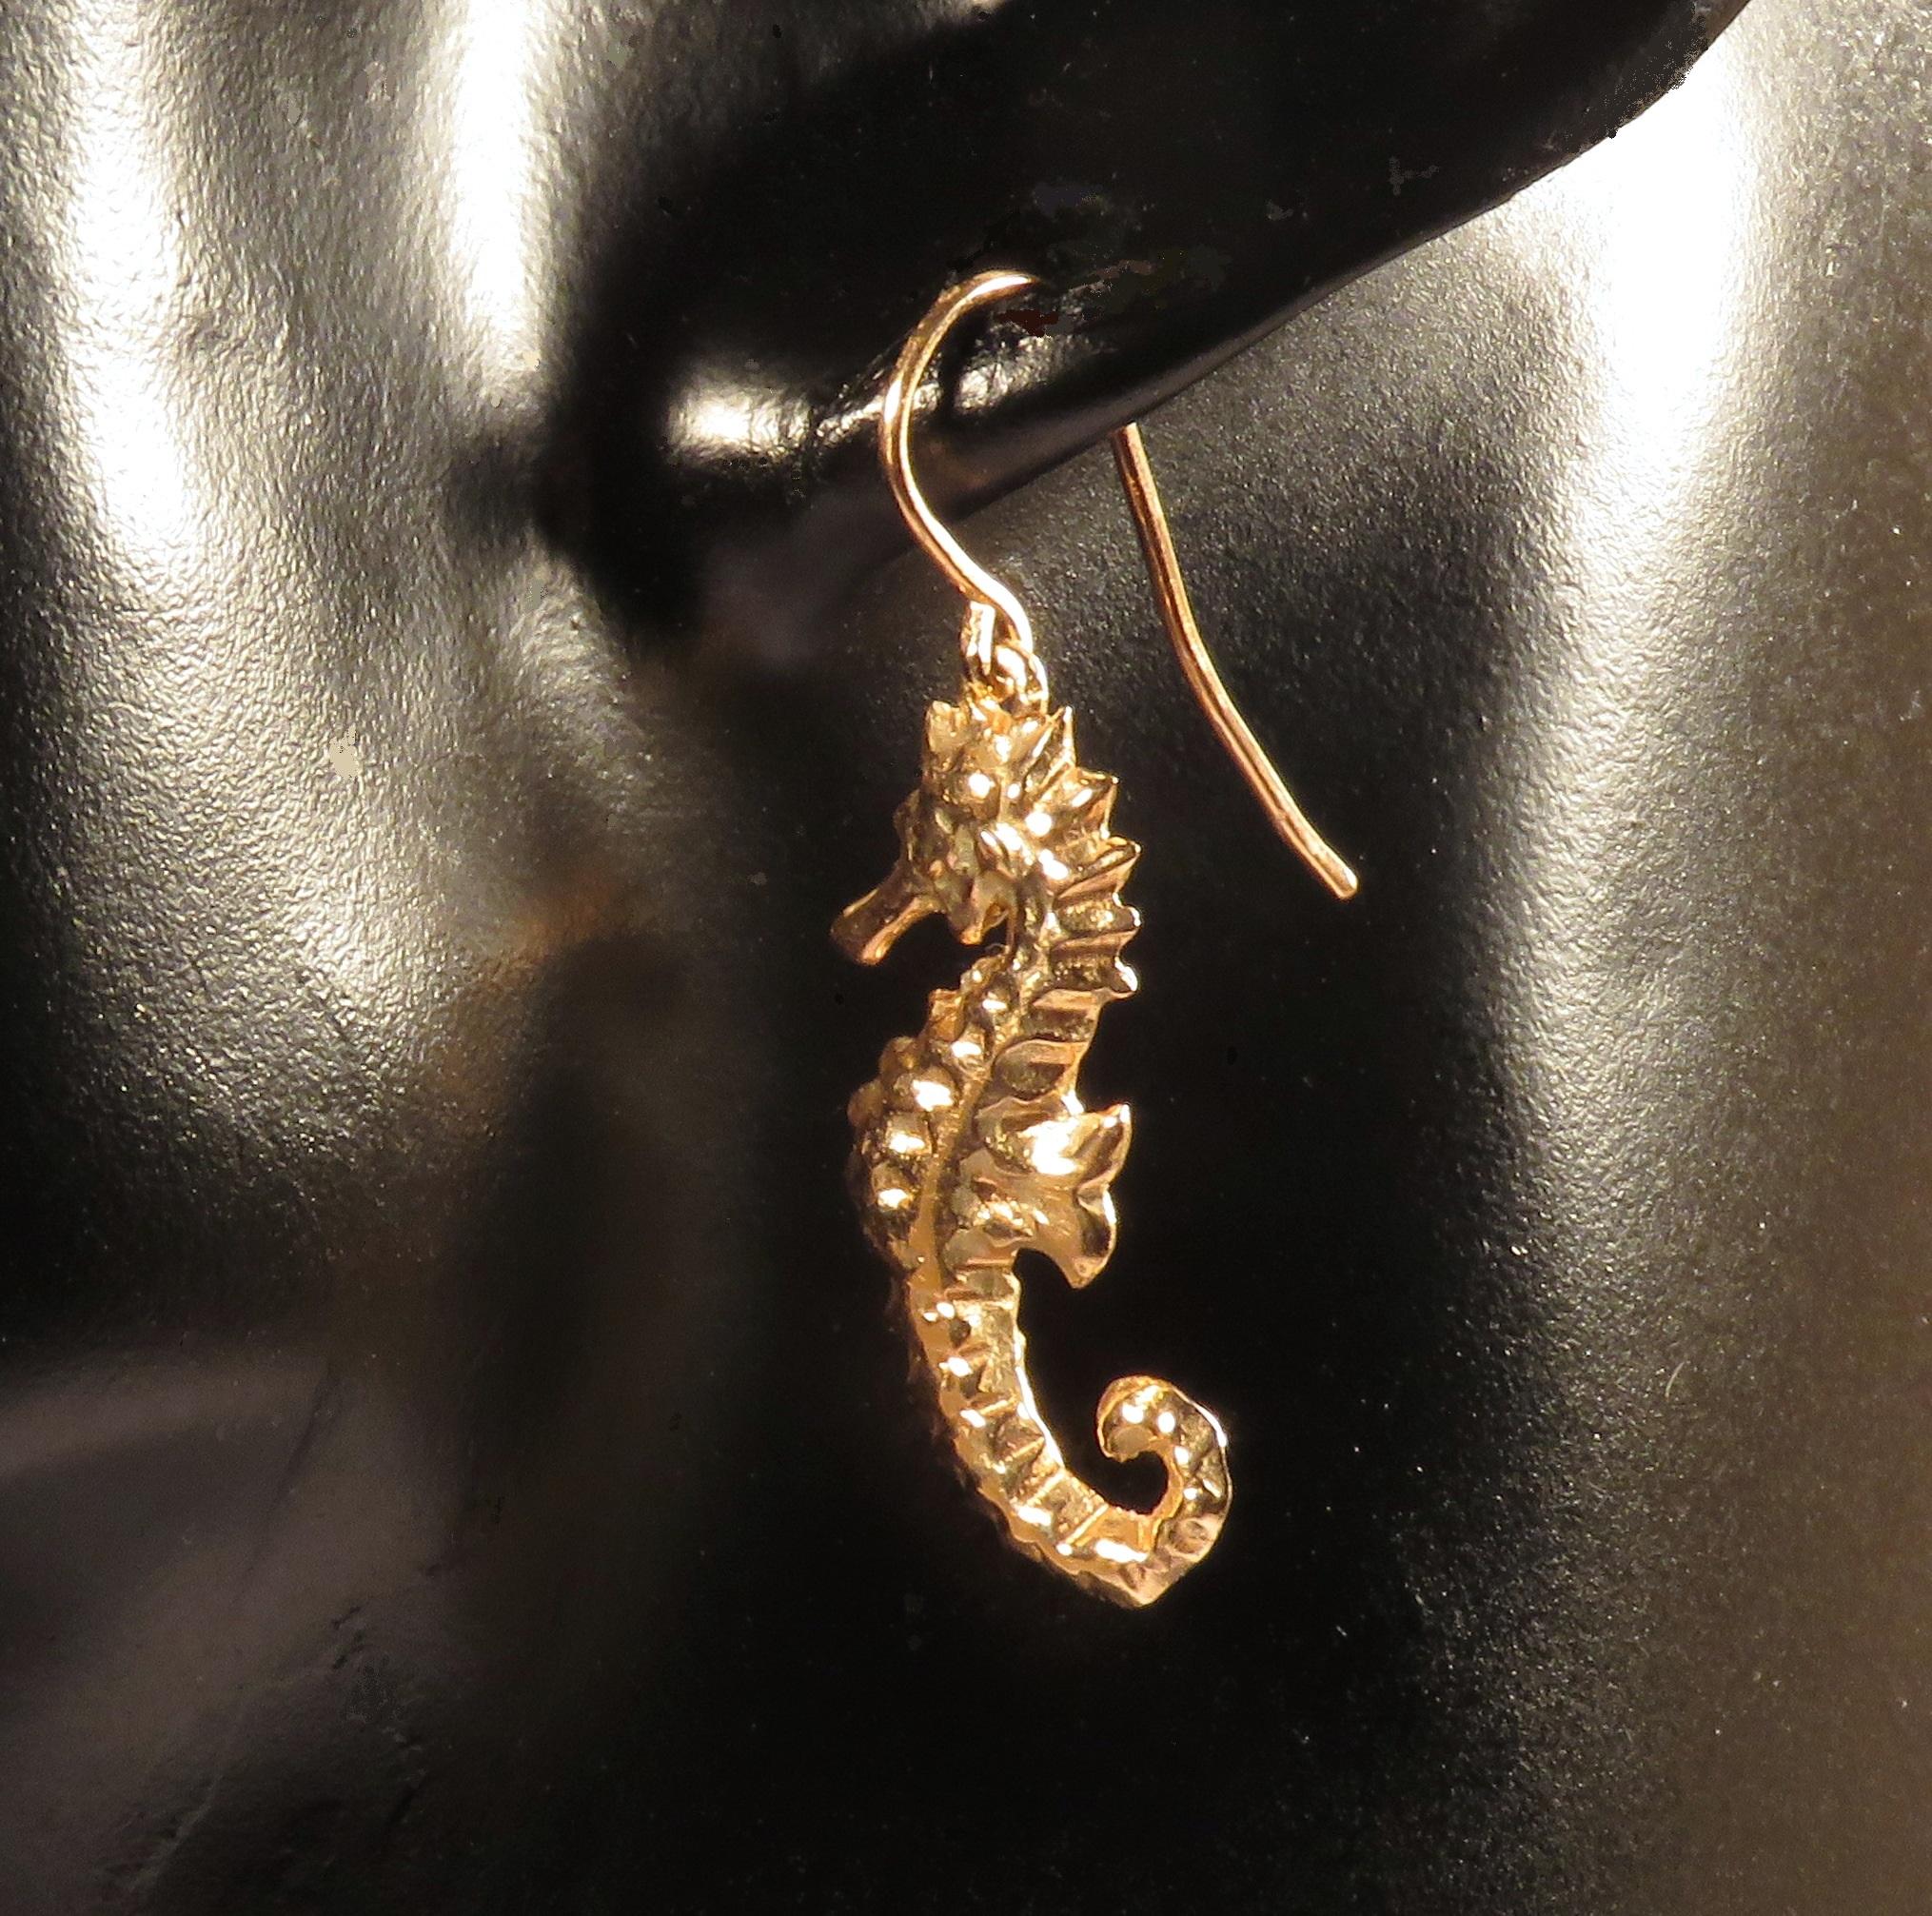 Beautiful dangle seahorse earrings in 9 karat rose gold. The length of each earring is 37 mm / 1.456 inches. Each item is stamped with the Italian gold mark 375 and Botta Gioielli brandmark